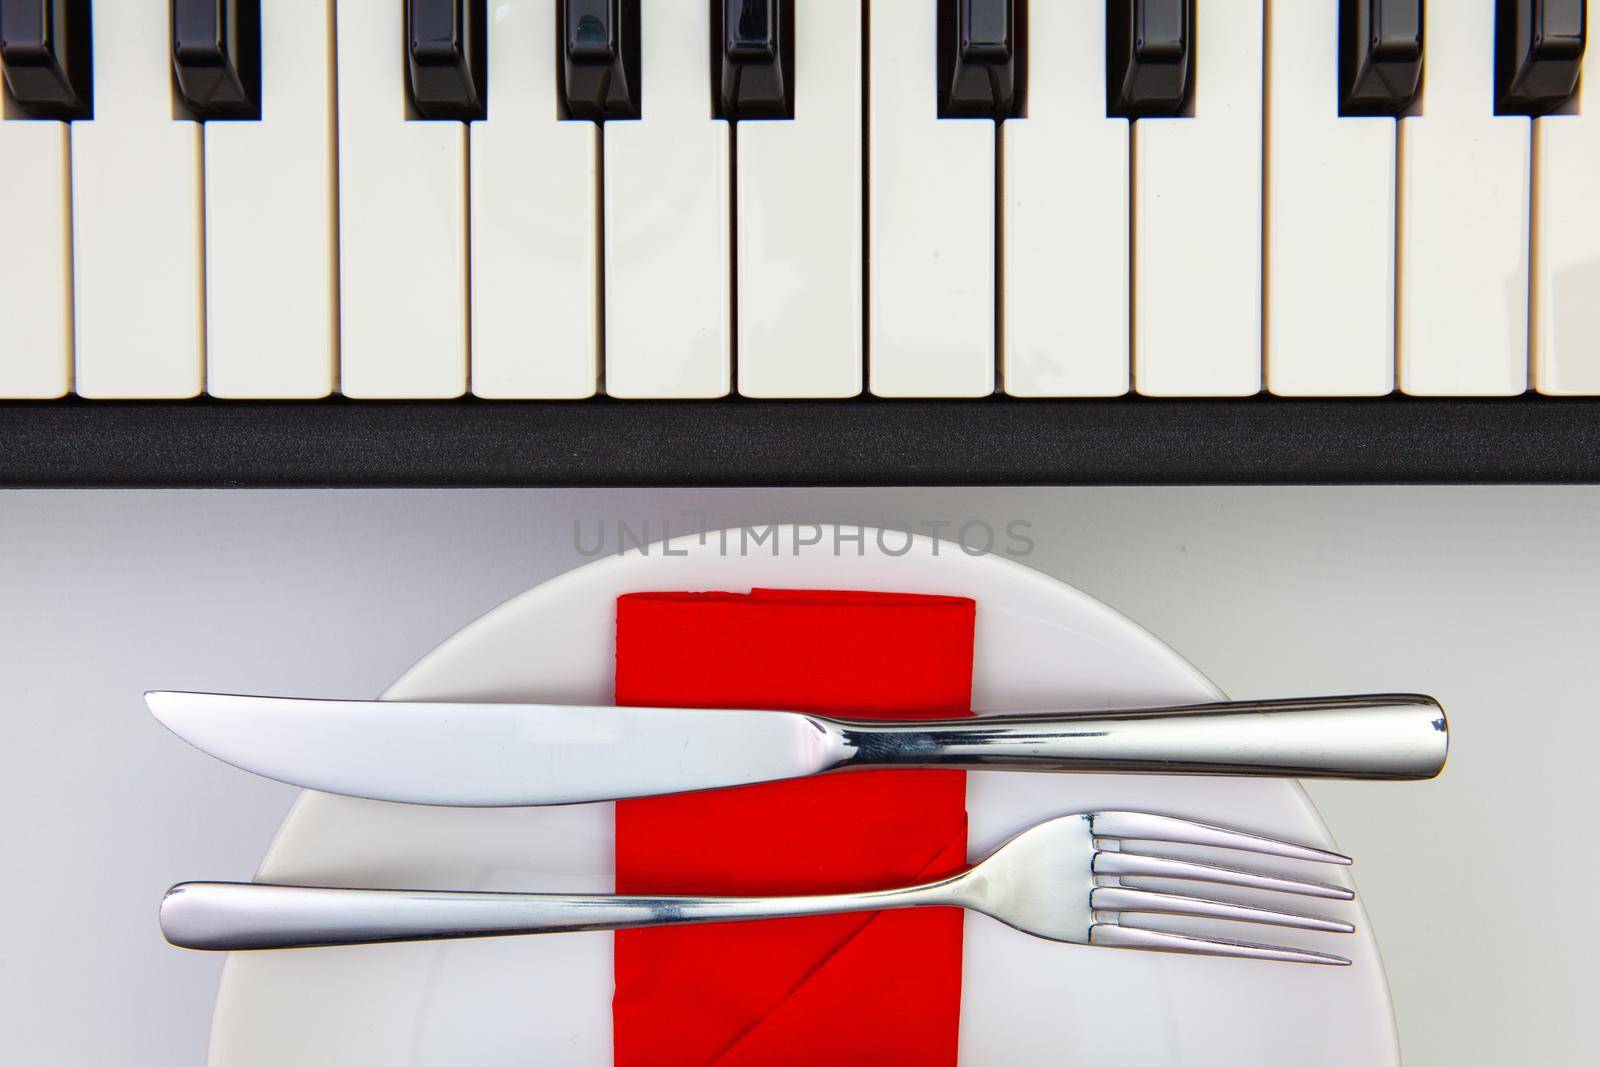 Symphony of taste. White plate and piano keys on the white  wooden table.Top view. Flat Lay Image.